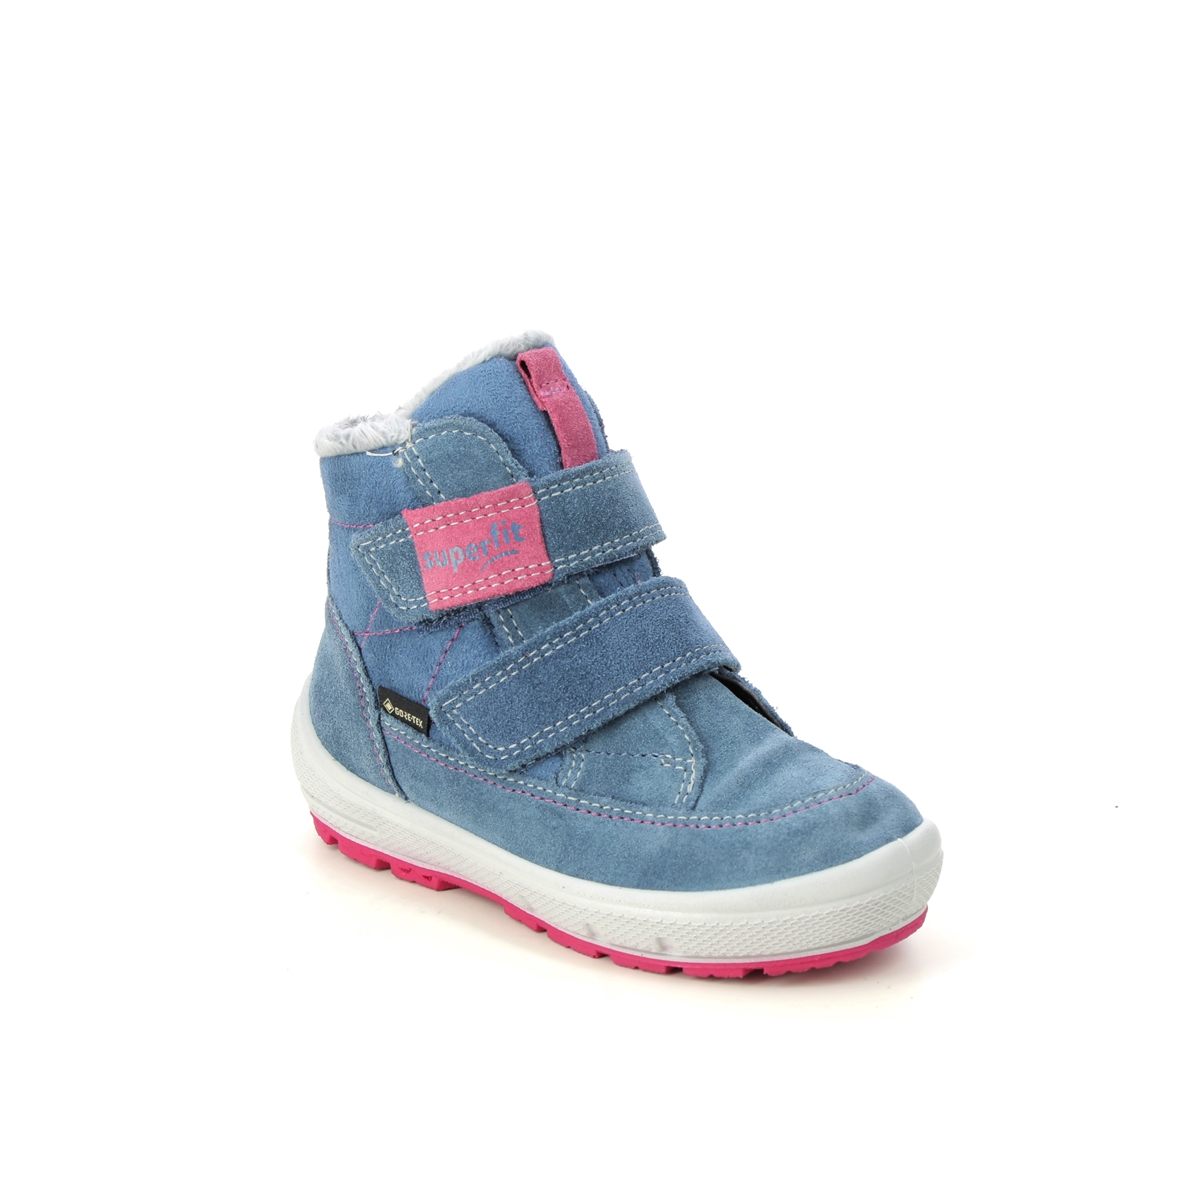 Superfit Groovy Gtx Blue Suede Kids Toddler Girls Boots 1009314-8020 In Size 28 In Plain Blue Suede